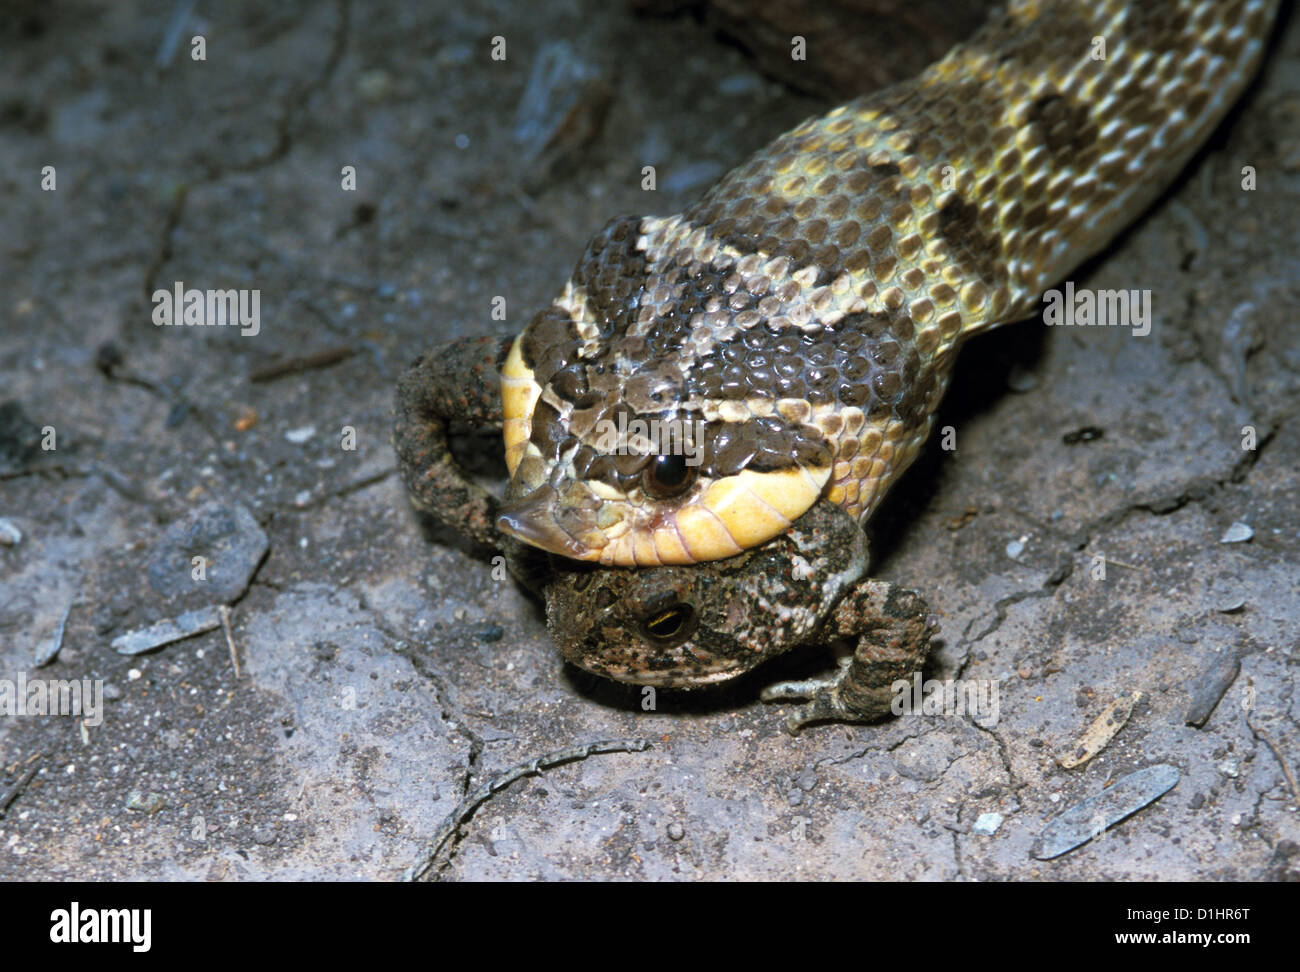 Mexican Hognose Snake eating a Woodhouse's Toad Heterodon kennerlyi Cochise County, Arizona, United States August Adult Stock Photo